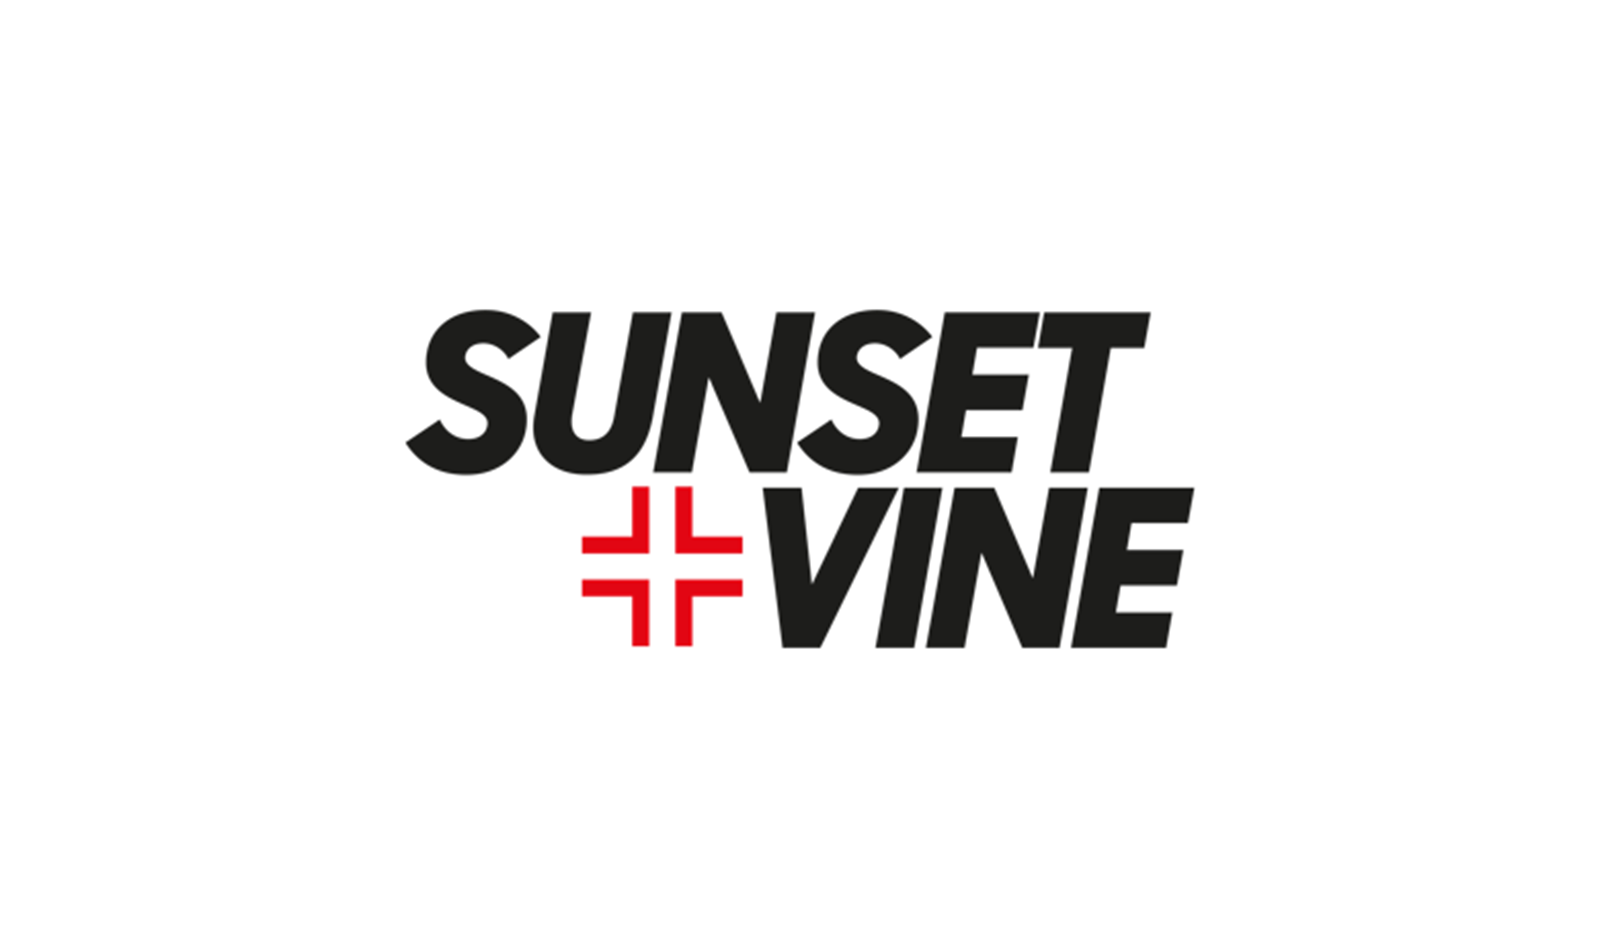 Sunset+Vine is best in show at Crufts for astounding 15th year